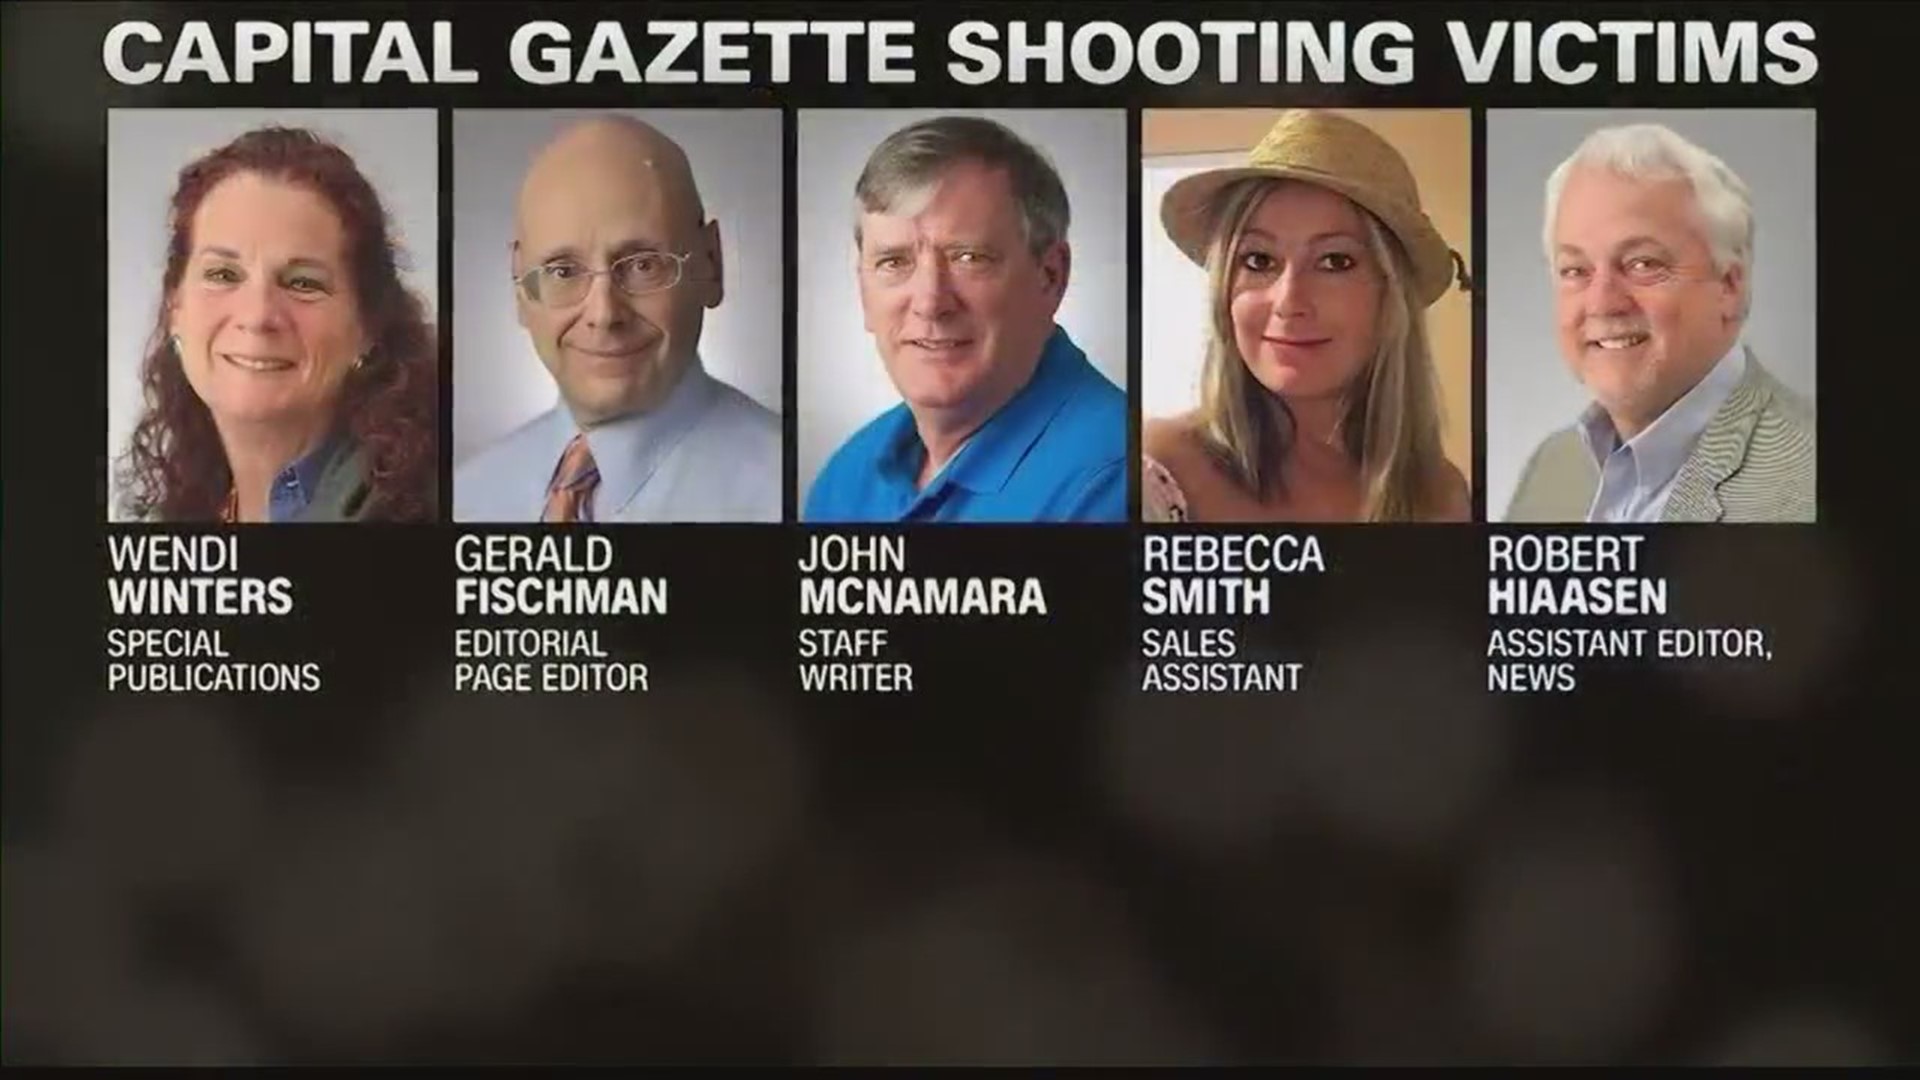 It's been a year since a shooting at the Capitol Gazette killed five people.